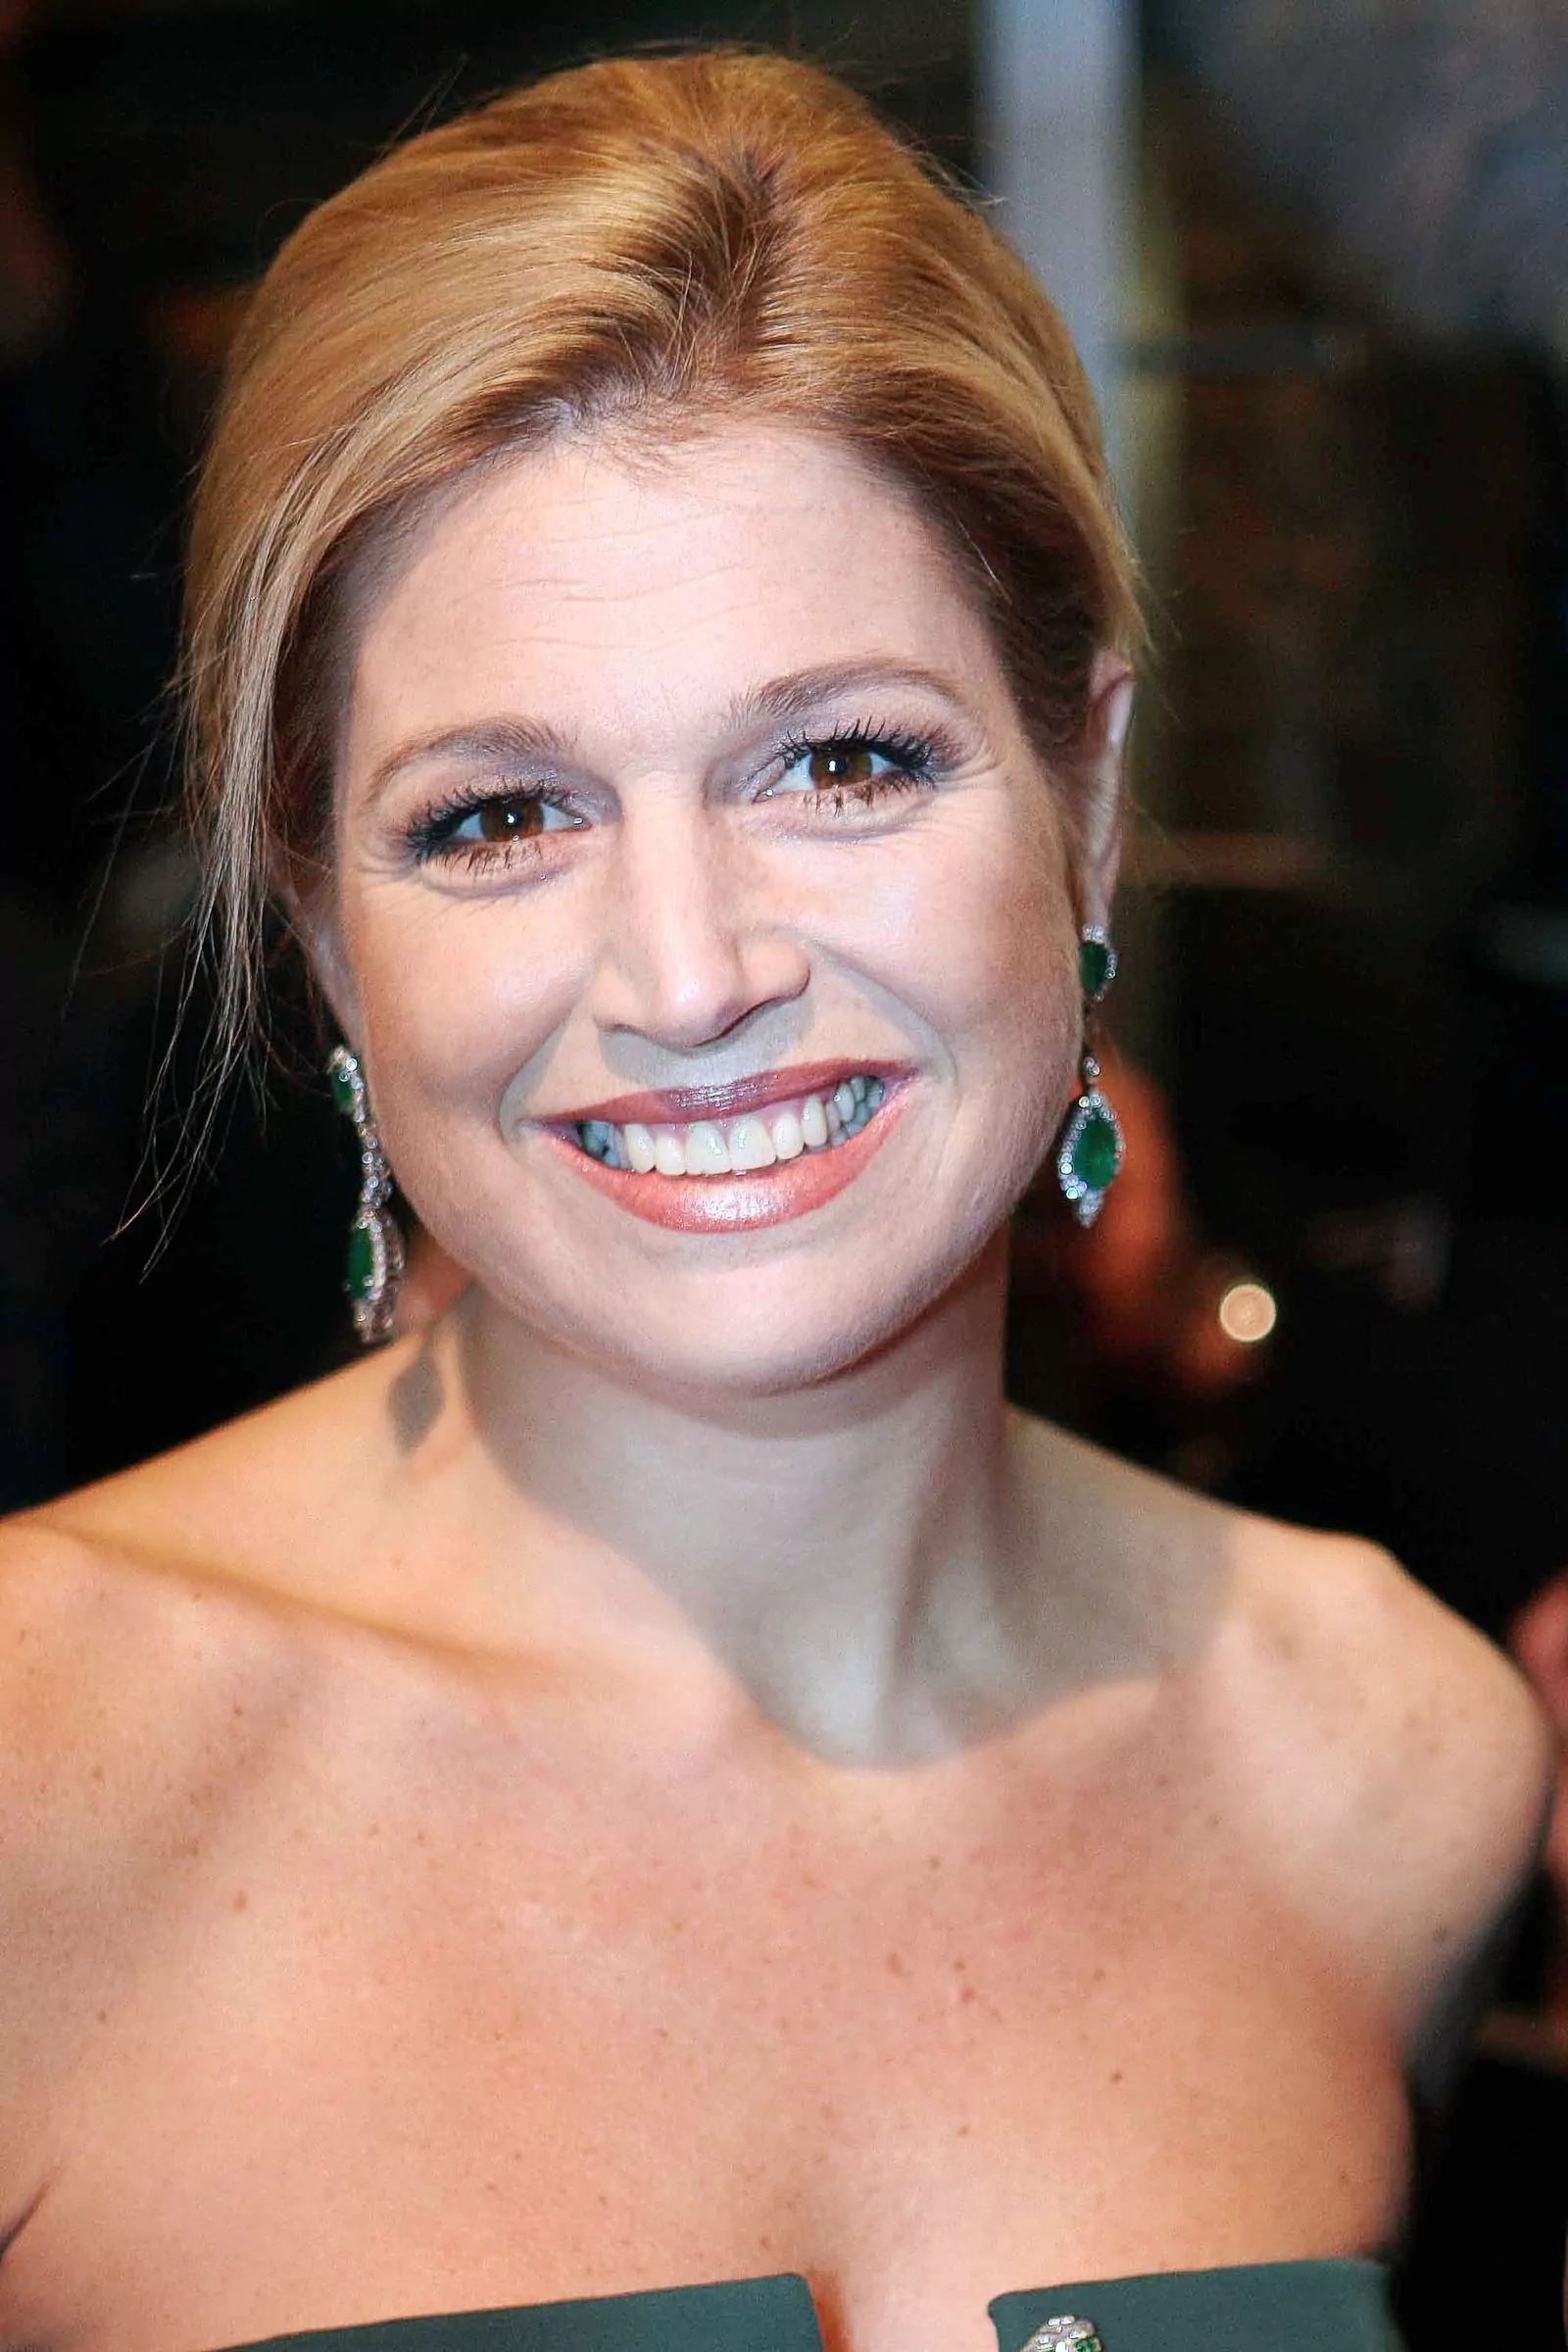 Princess Maxima at the premiere of the film 